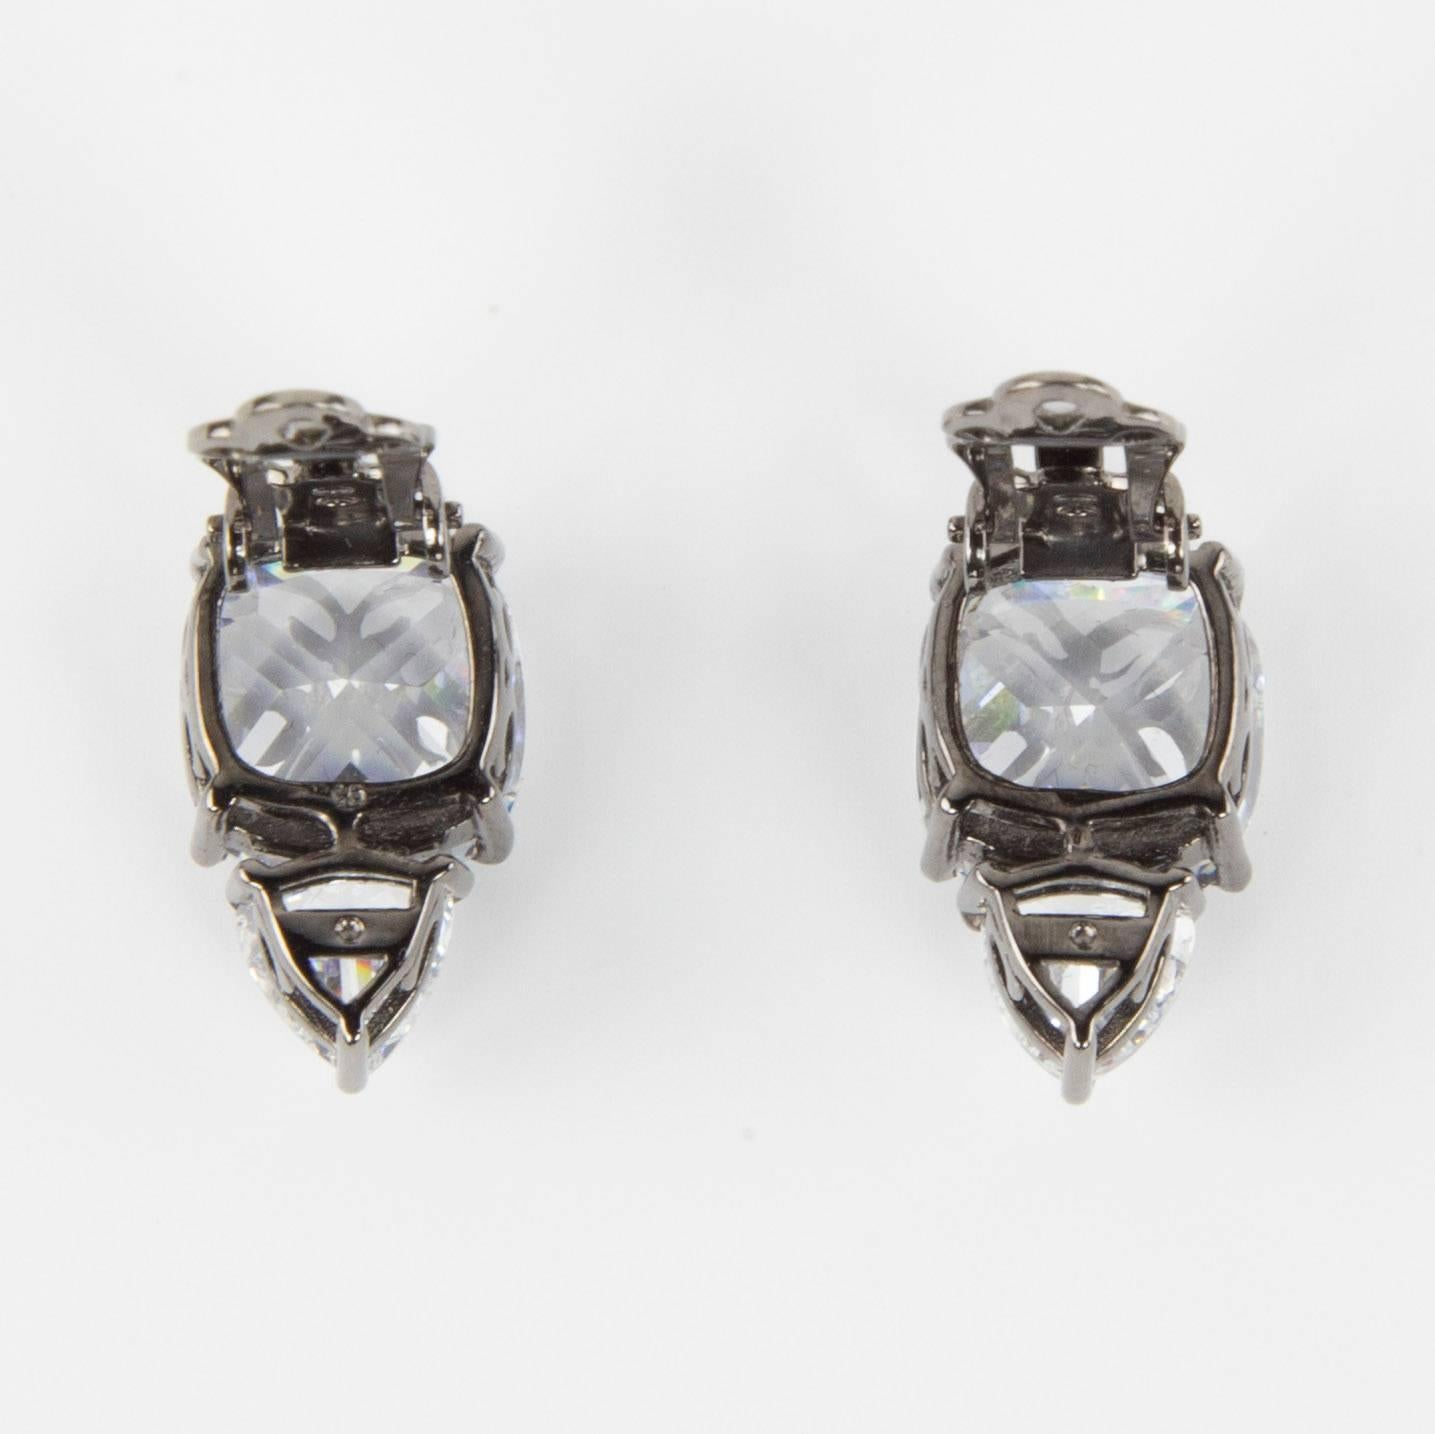 Simply Beautiful…each earring is set with a Trillion and Cushion square shaped Sparkling Faux Diamonds, making a striking statement! All hand set in Rhodium Sterling Silver. Approx. total length .75